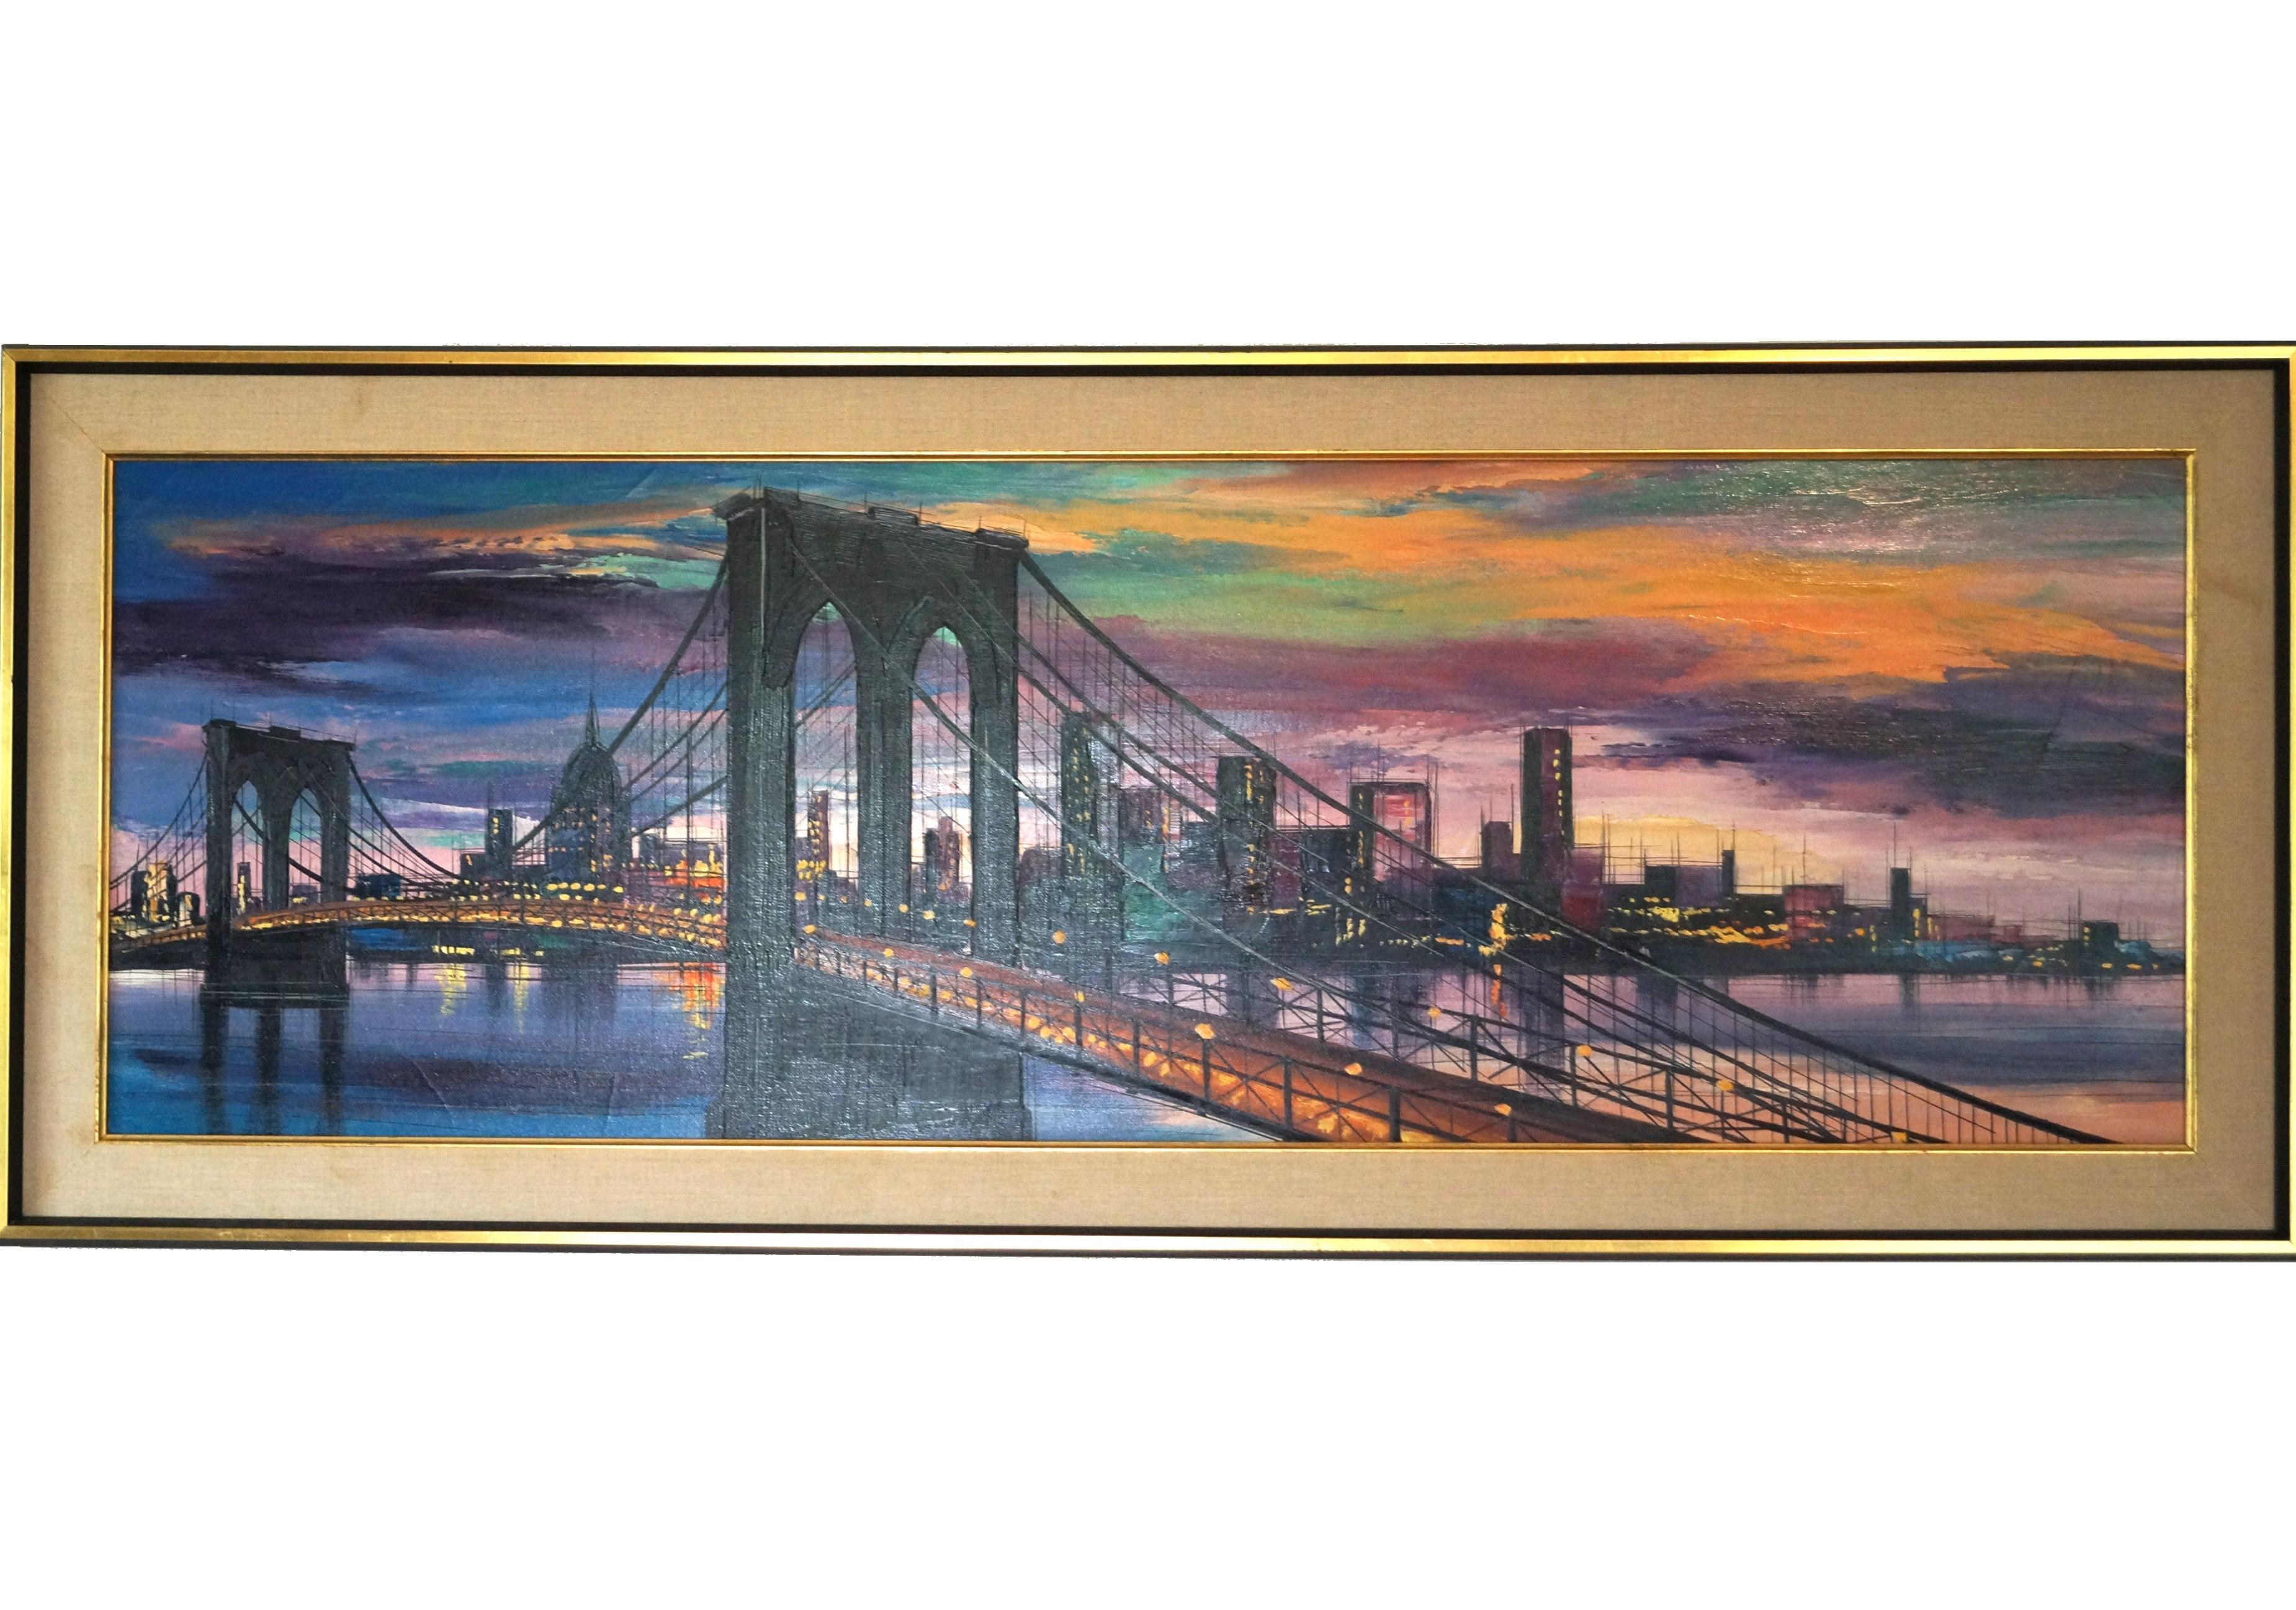 1960's City Scape Bridge Landscape Sunset Dusk Dawn. Unsigned, but it was not removed from frame. Measure: 49